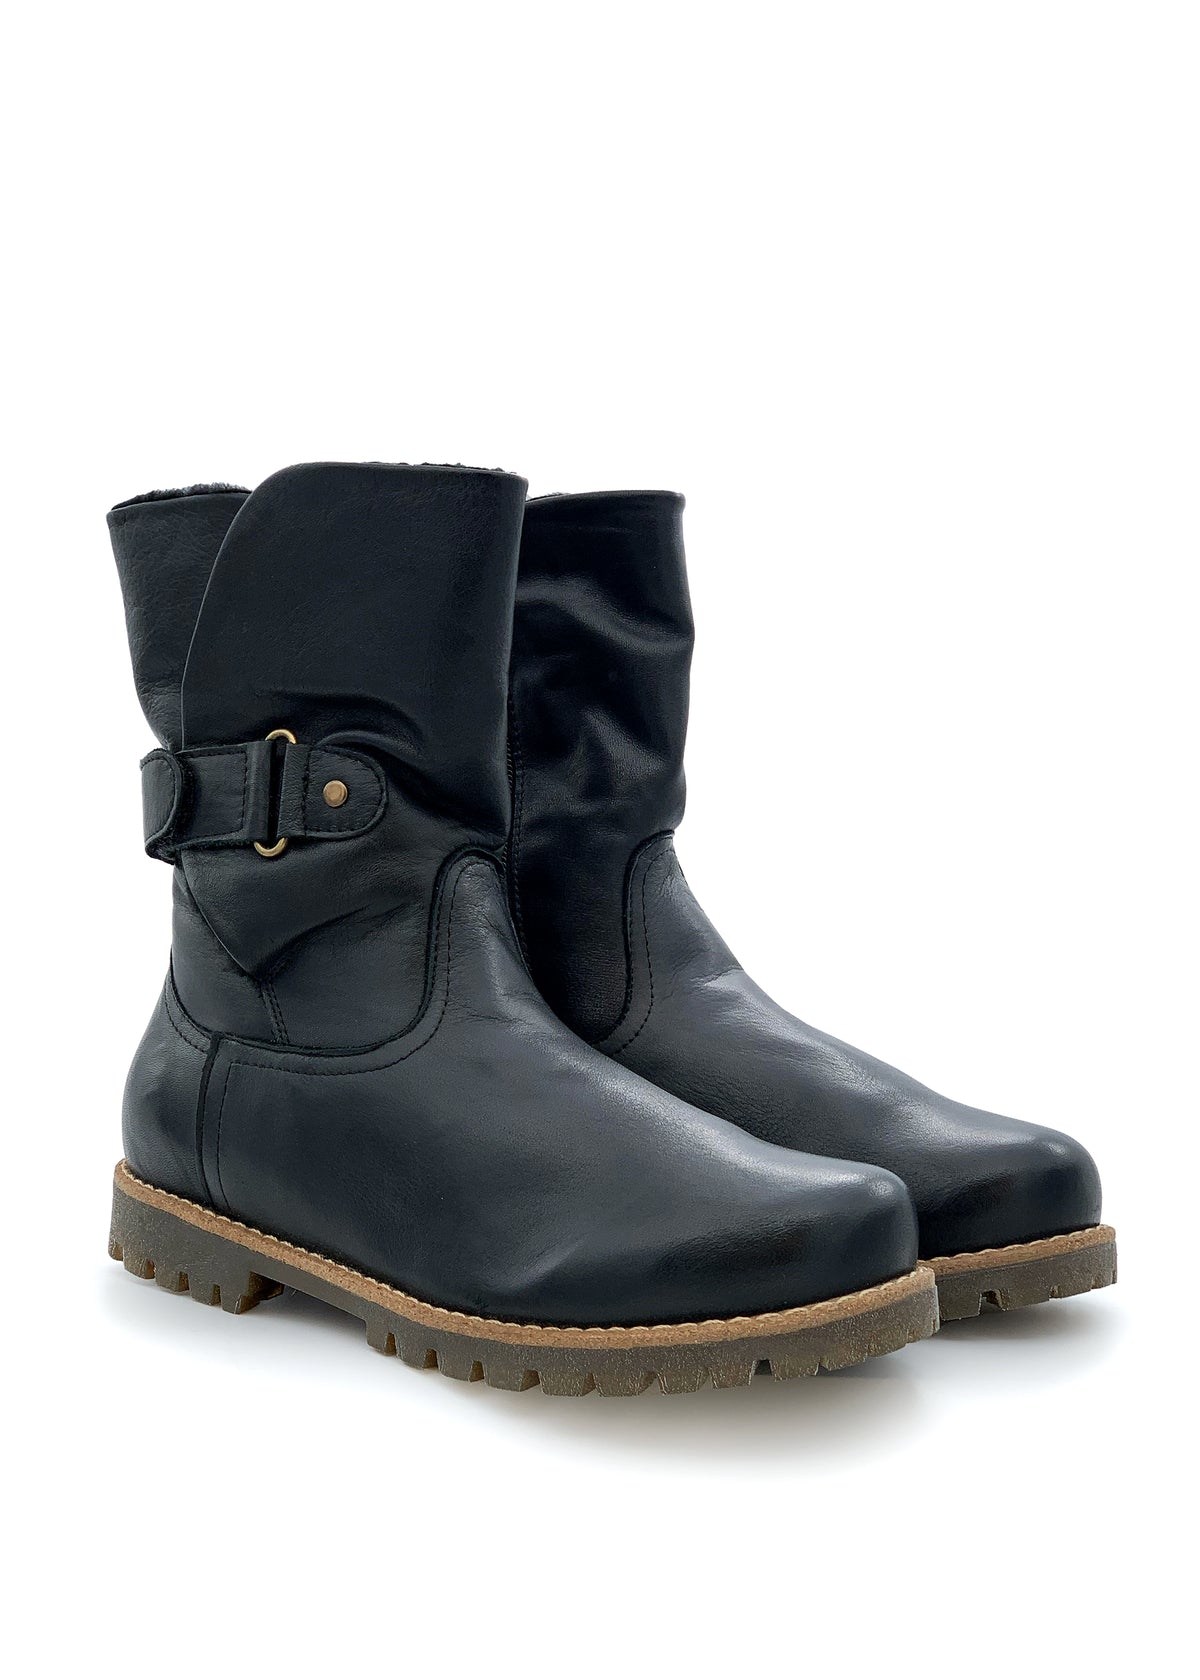 Winter ankle boots - black